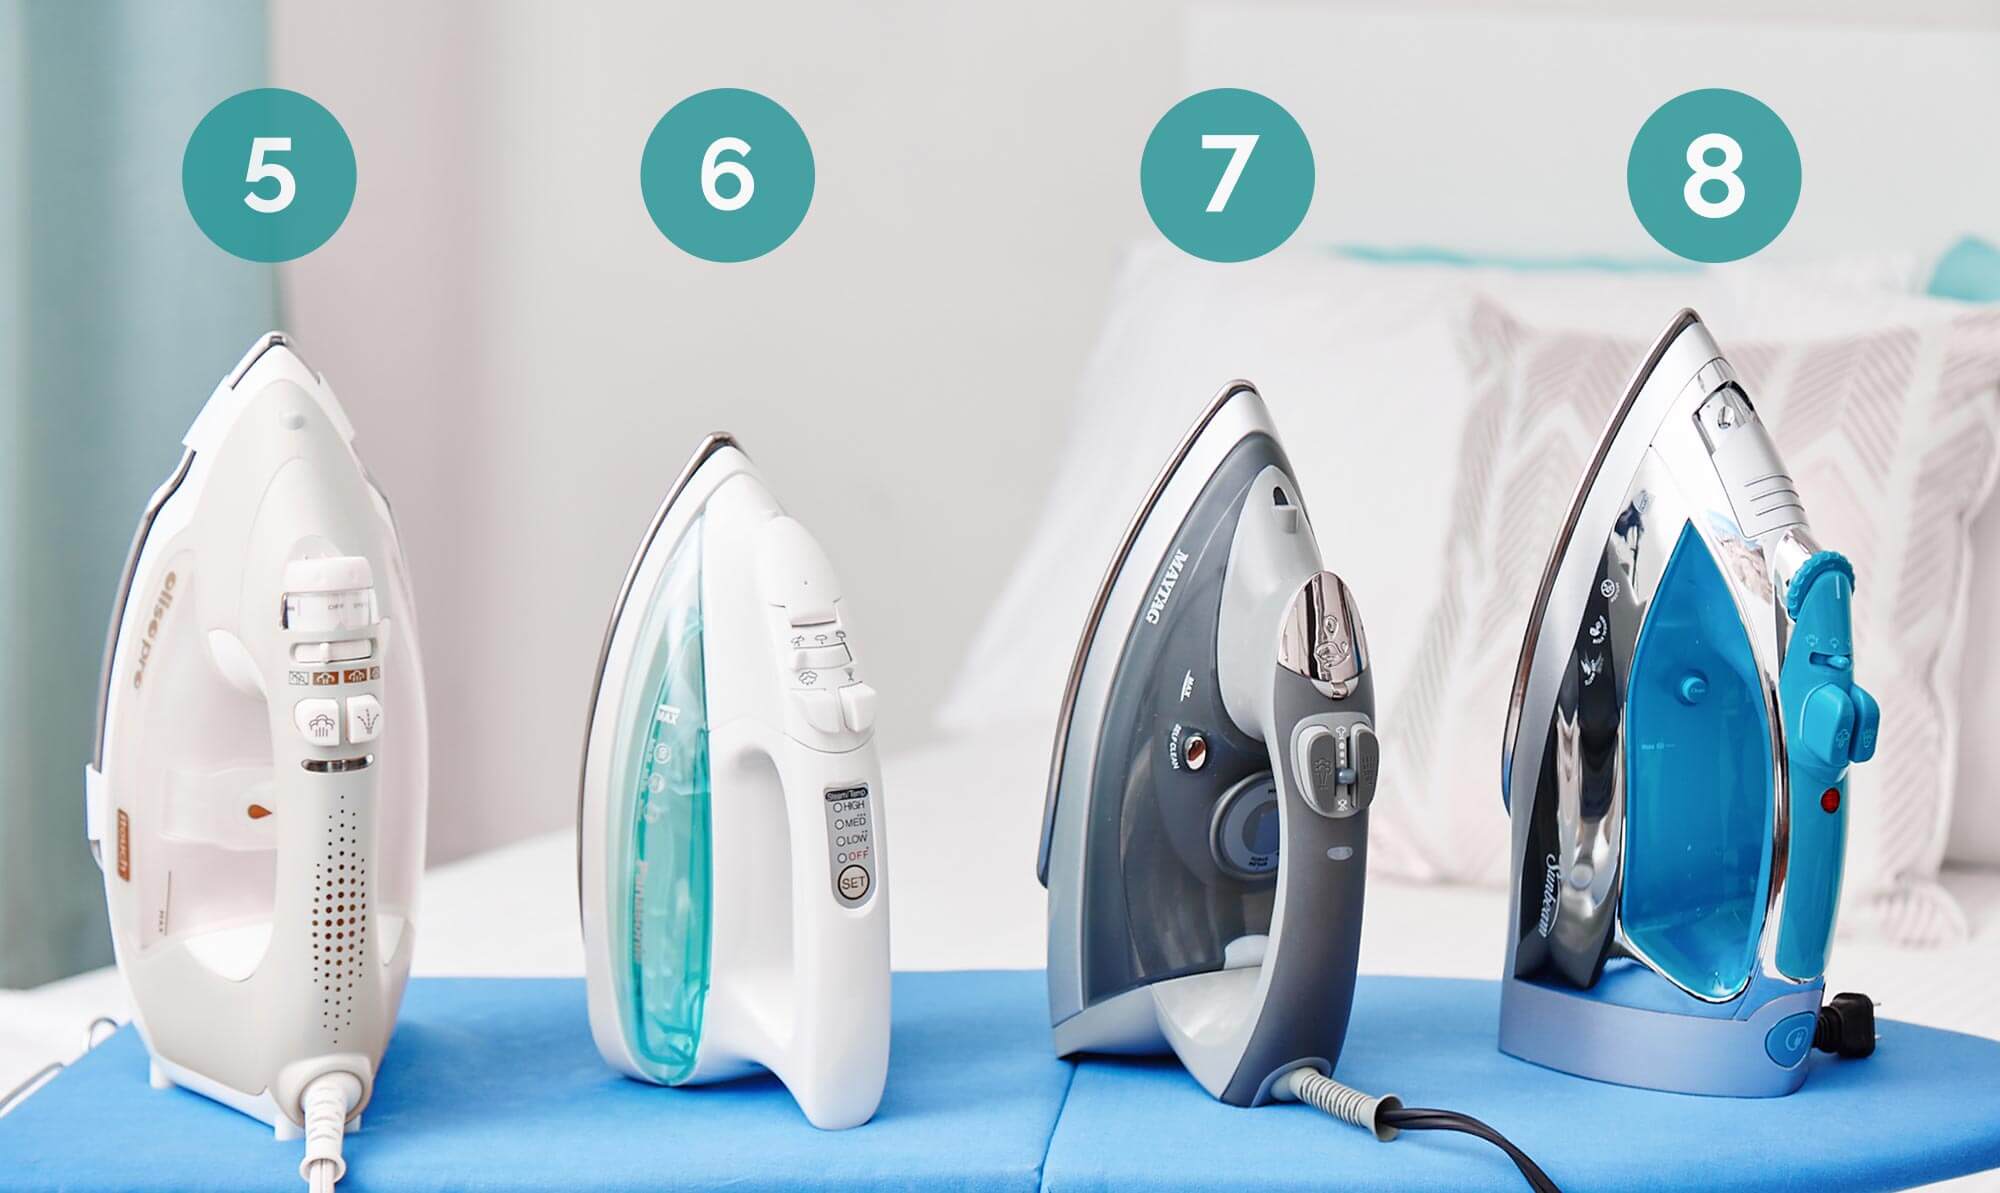 steam iron for clothes